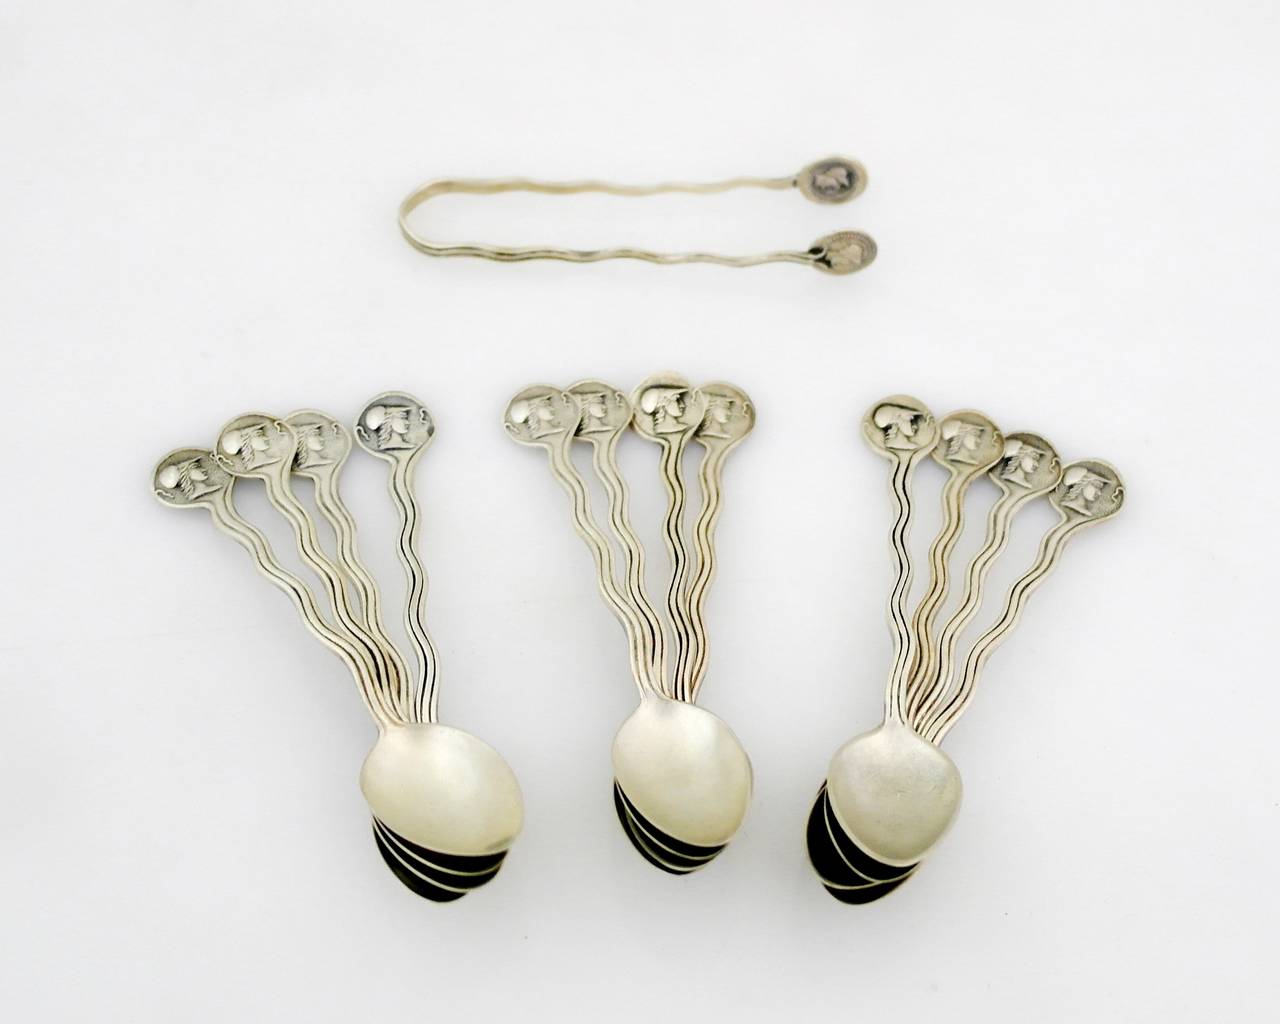 Being offered is a superb, circa 1864 coin silver demitasse set by Gorham of providence, Rhode Island, comprising 12 demitasse spoons with handles in a wave design leading to an embossed medallion. Sugar tongs are decorated similarly. Set includes